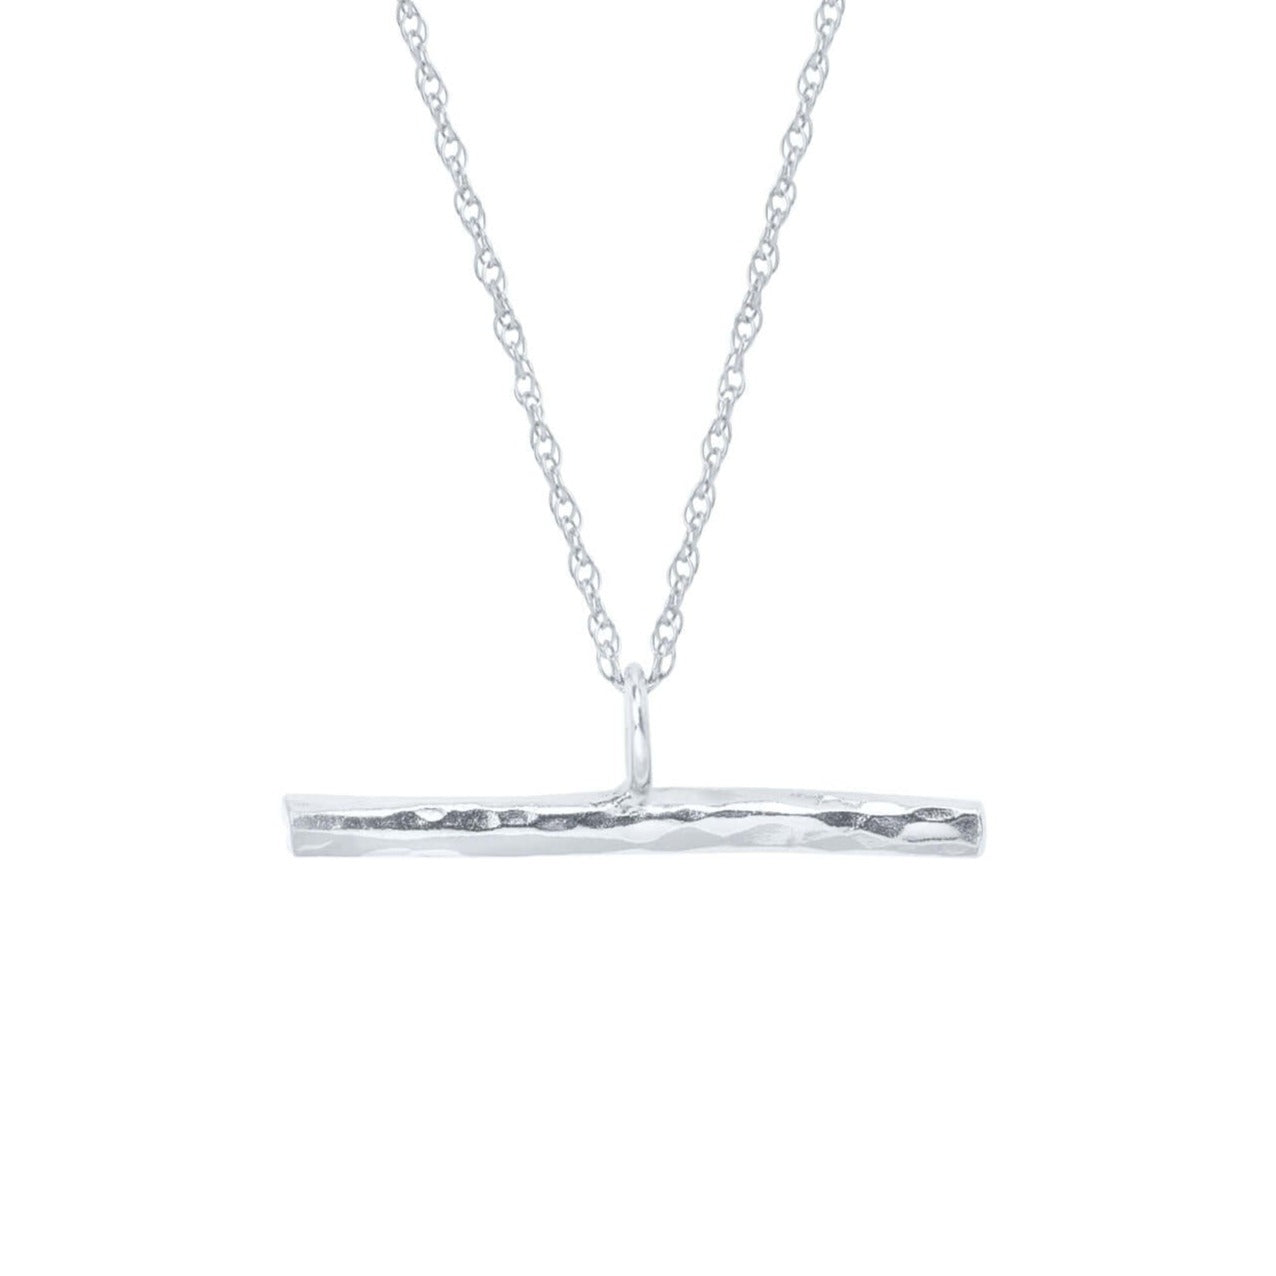 silver earth tbar, t-bar necklace, sterling silver tbar, sterling silver t-bar